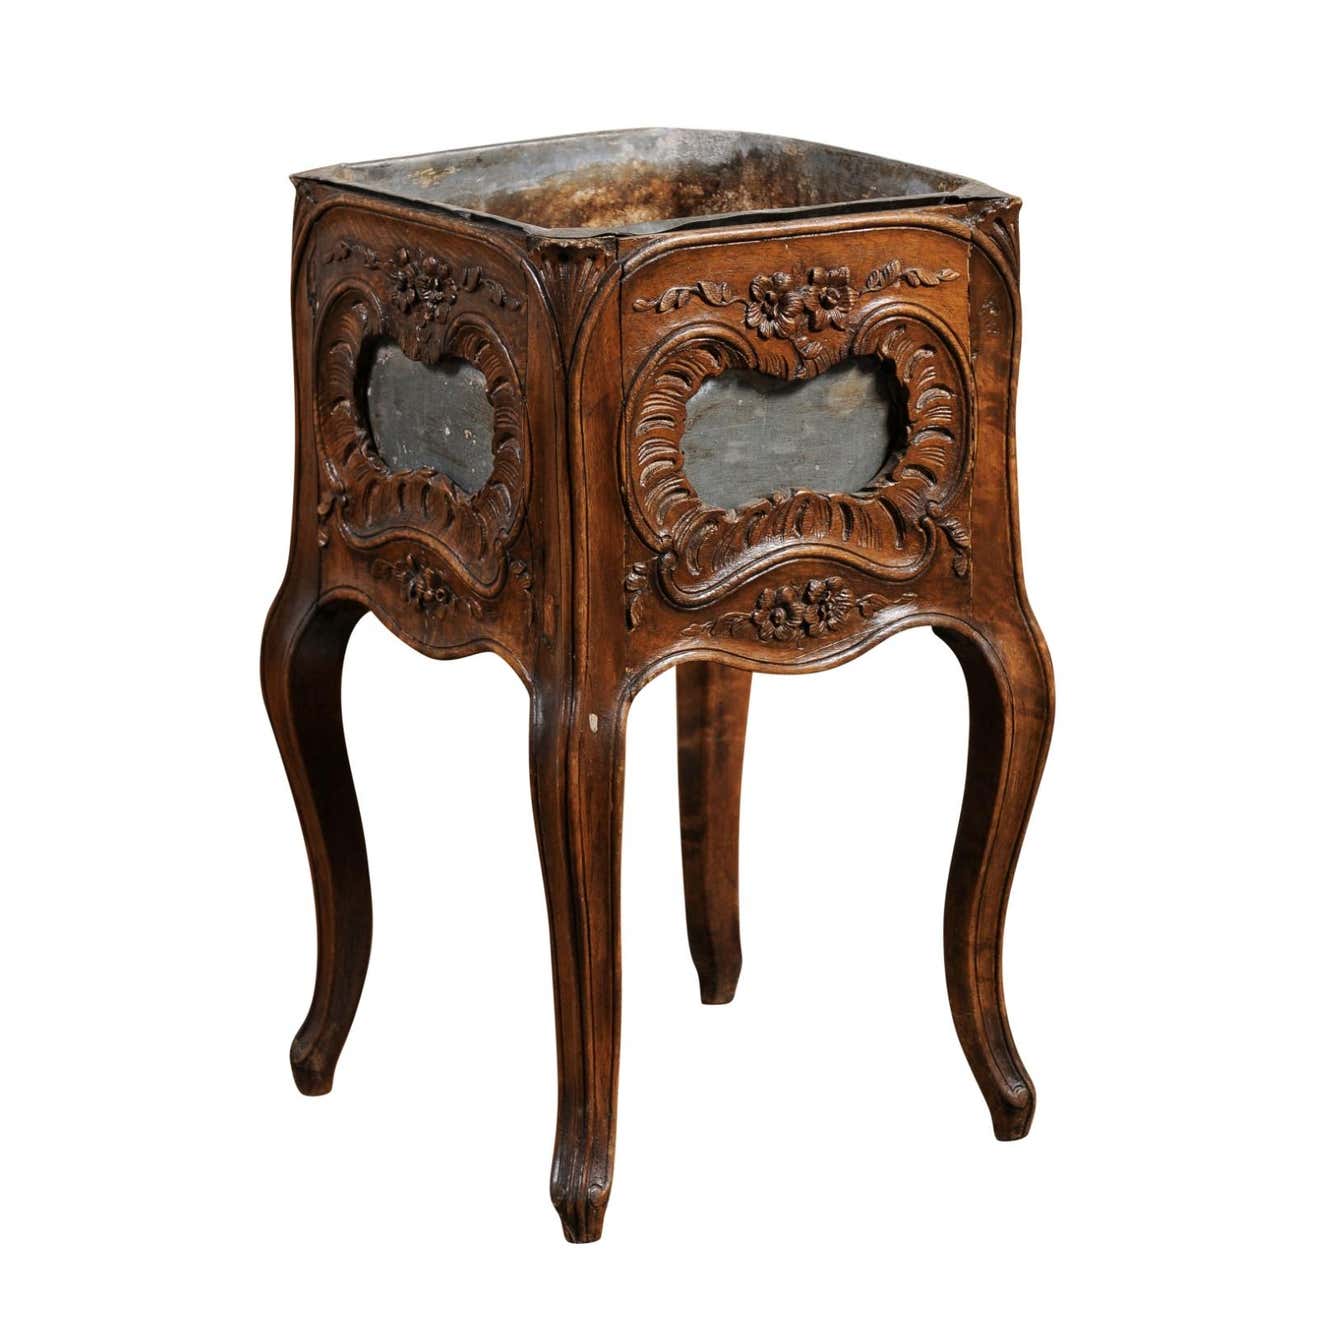 French 1890s Rococo Revival Walnut Planter with Rocailles and Floral Motifs